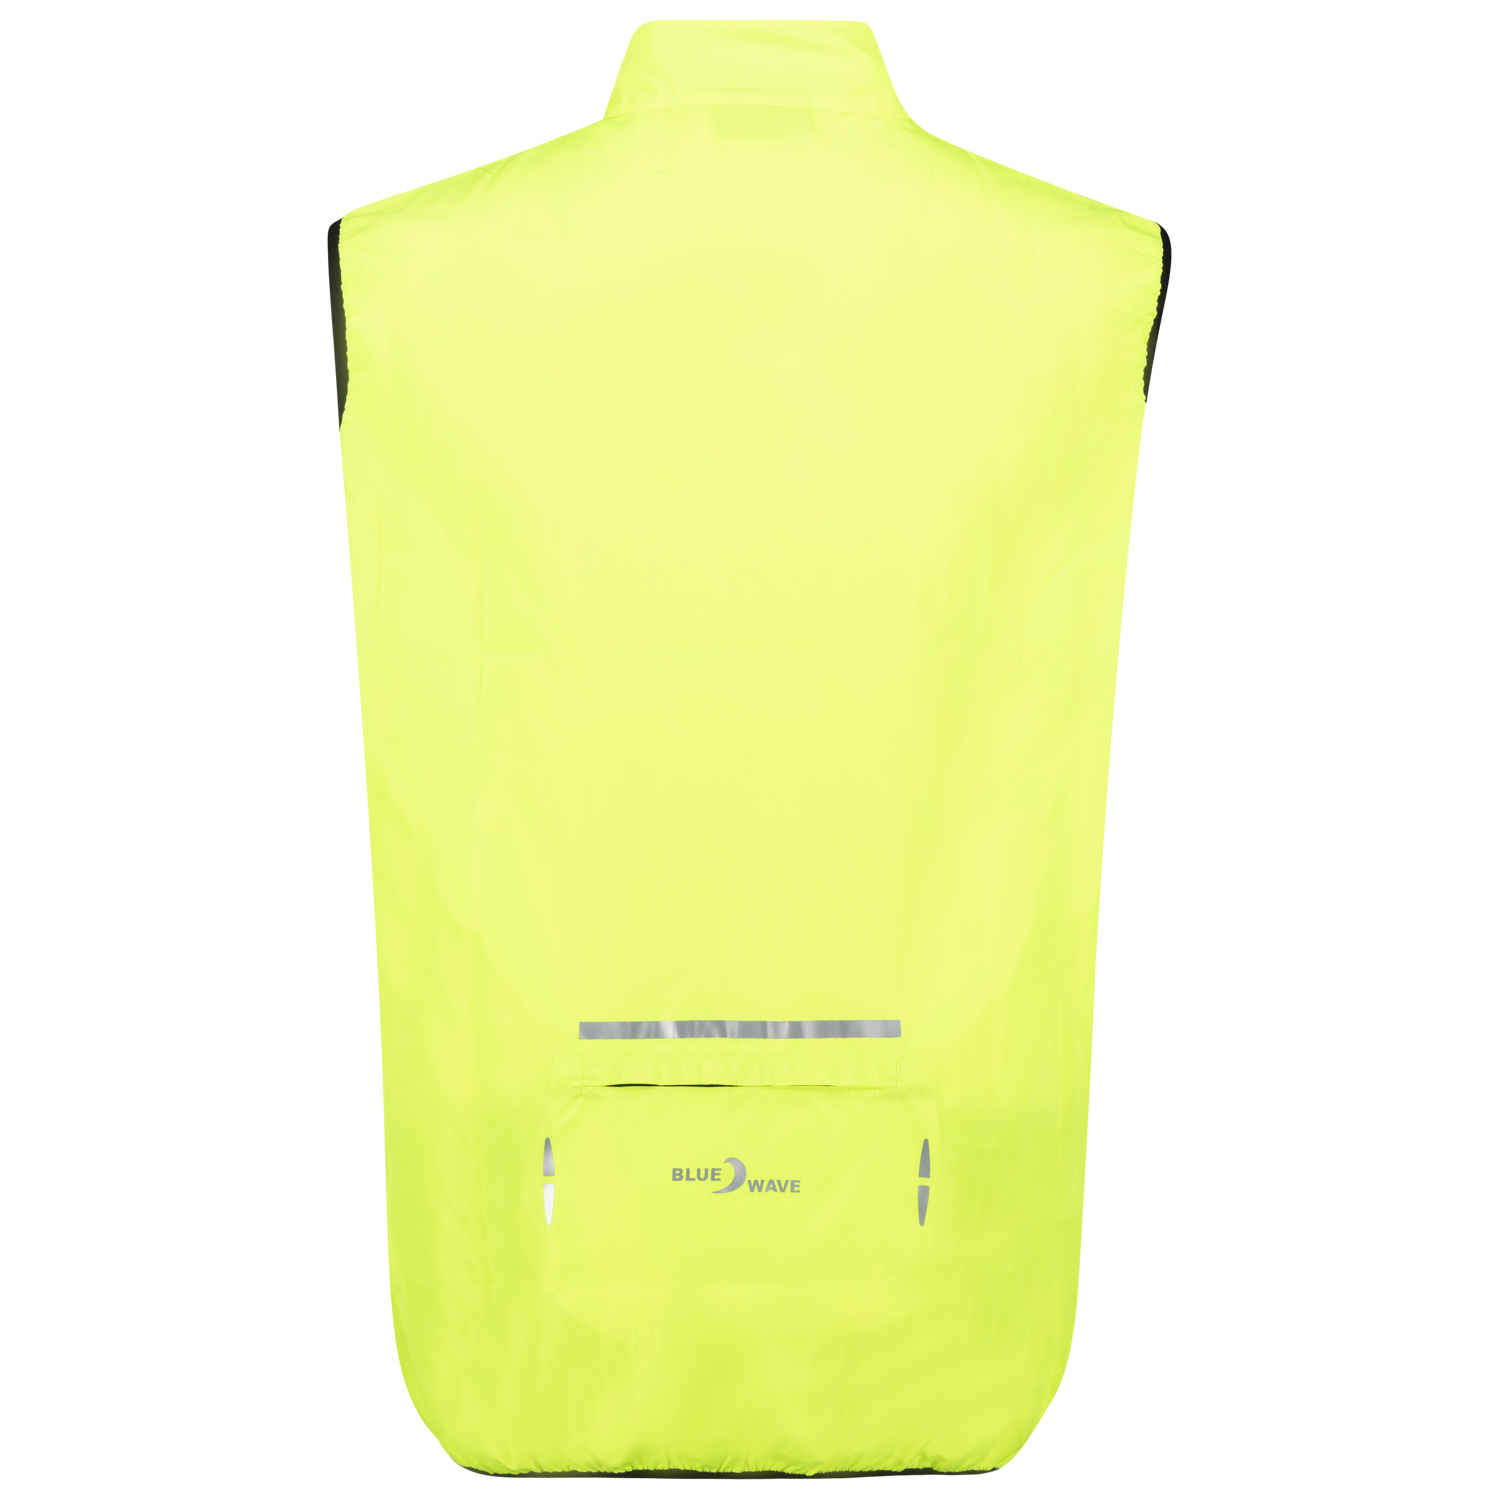 Bike waistcoat "Adrian" in neon yellow by Blue Wave for men up to oversize 10XL